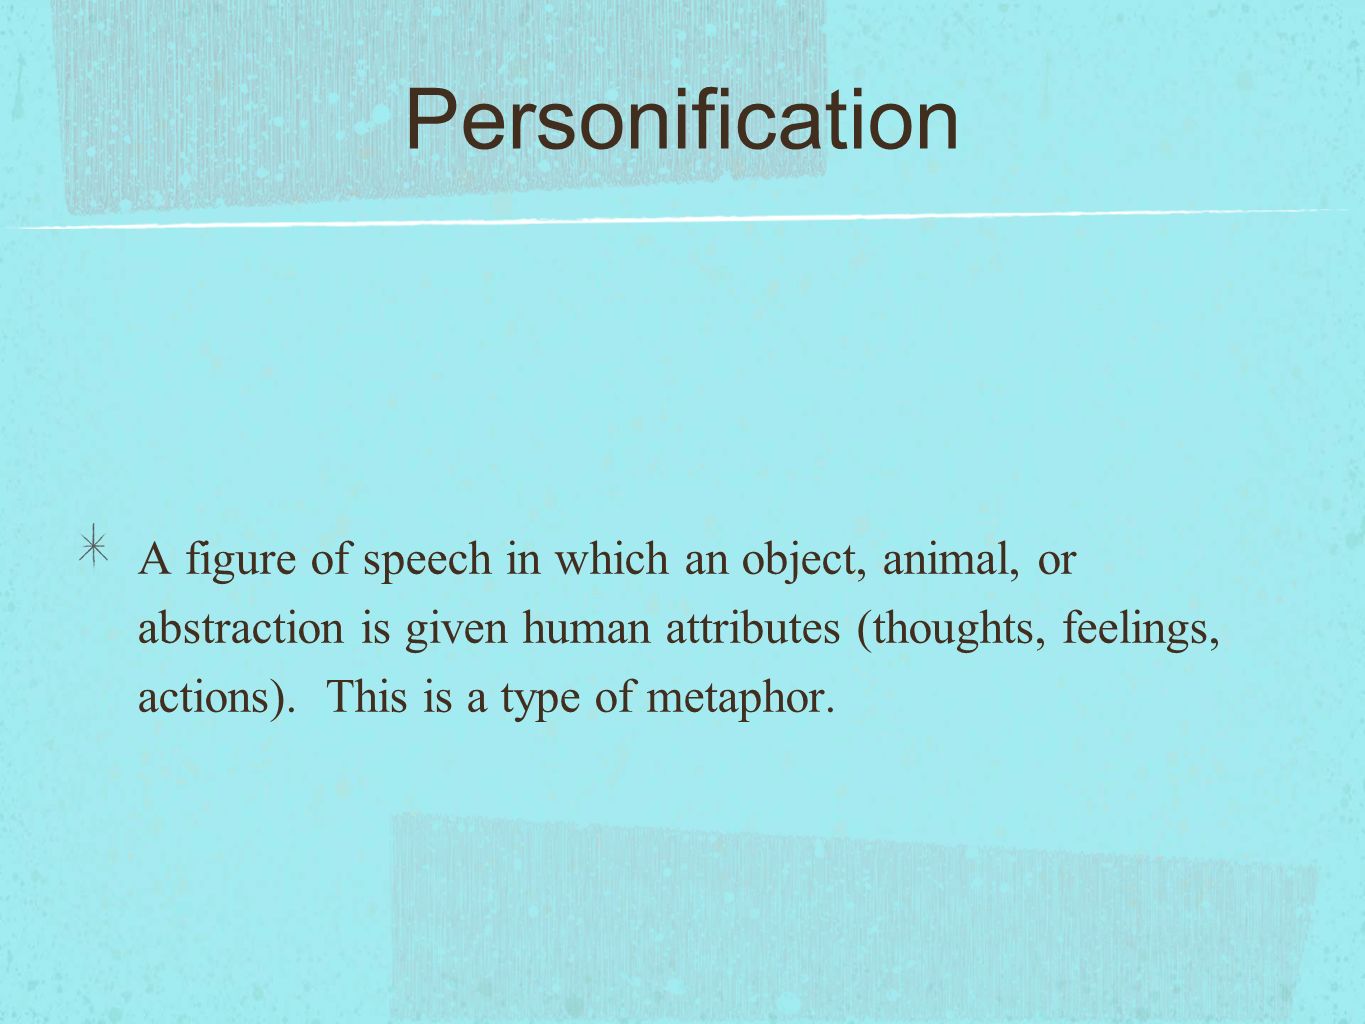 Personification A figure of speech in which an object, animal, or abstraction is given human attributes (thoughts, feelings, actions).